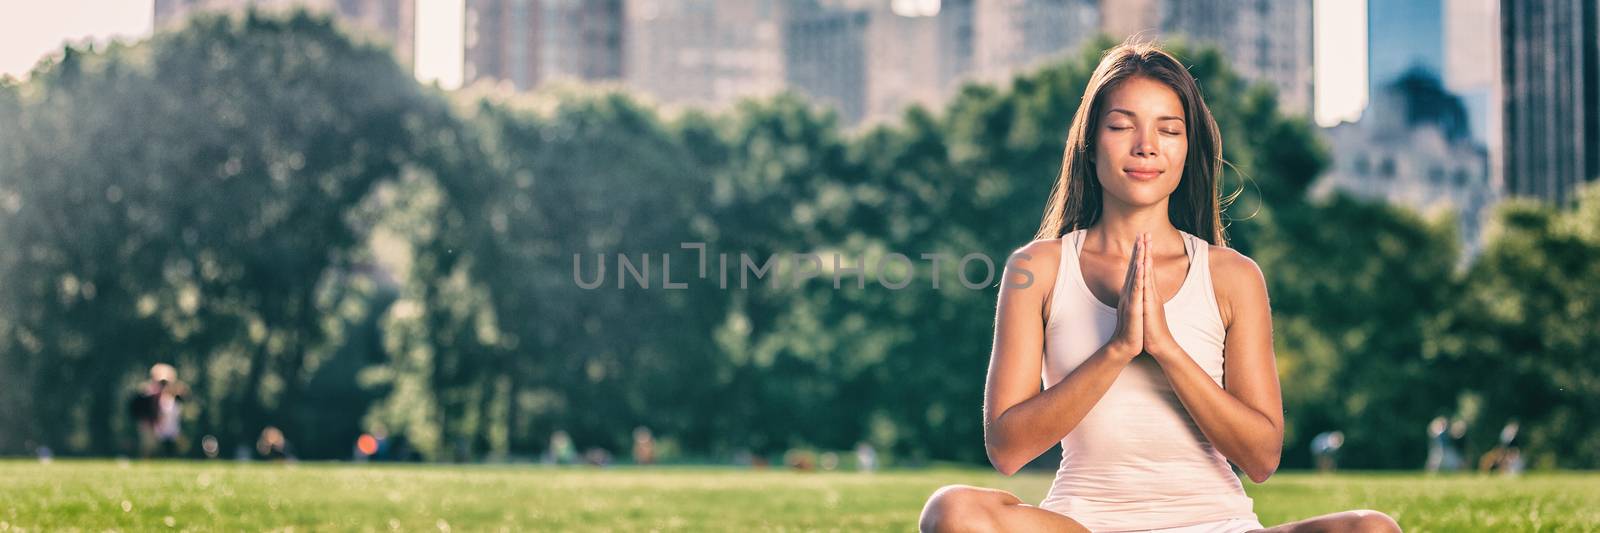 Yoga woman meditation praying outside in city park wellness banner panorama .Summer exercise lifestyle active young Asian girl meditating background.